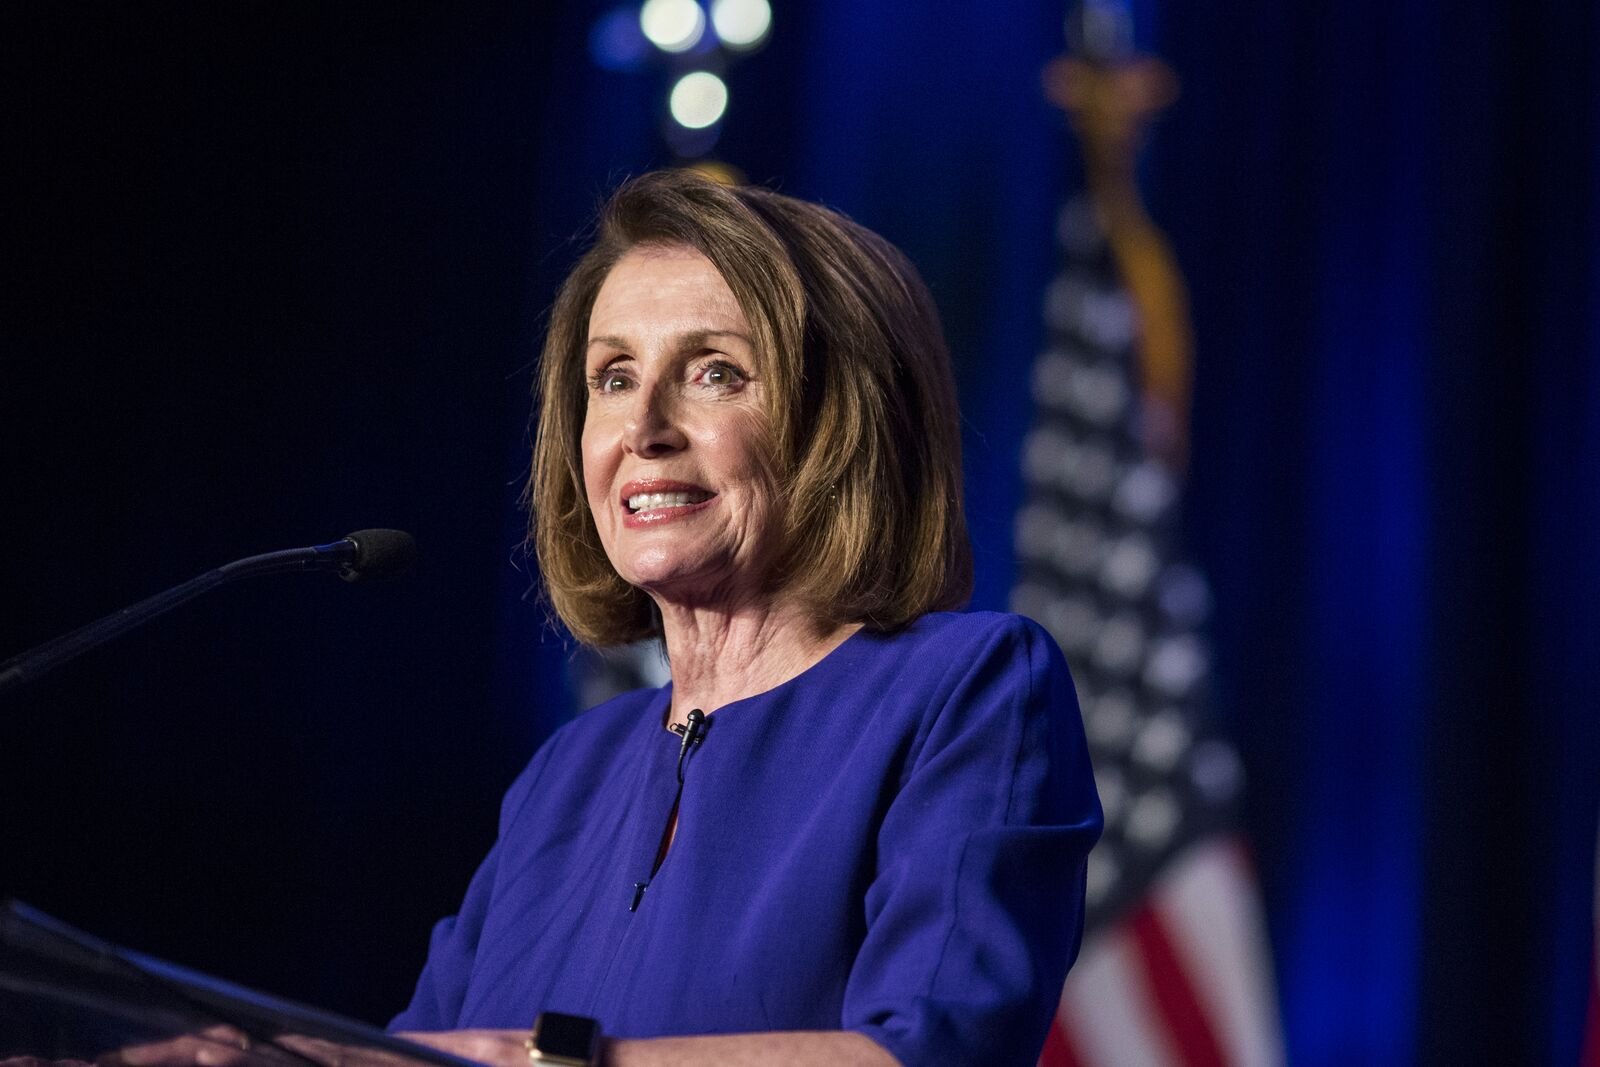 Nancy Pelosi at a DCCC election watch party on November 6, 2018, in Washington, DC. | Photo: Zach Gibson/Getty Images